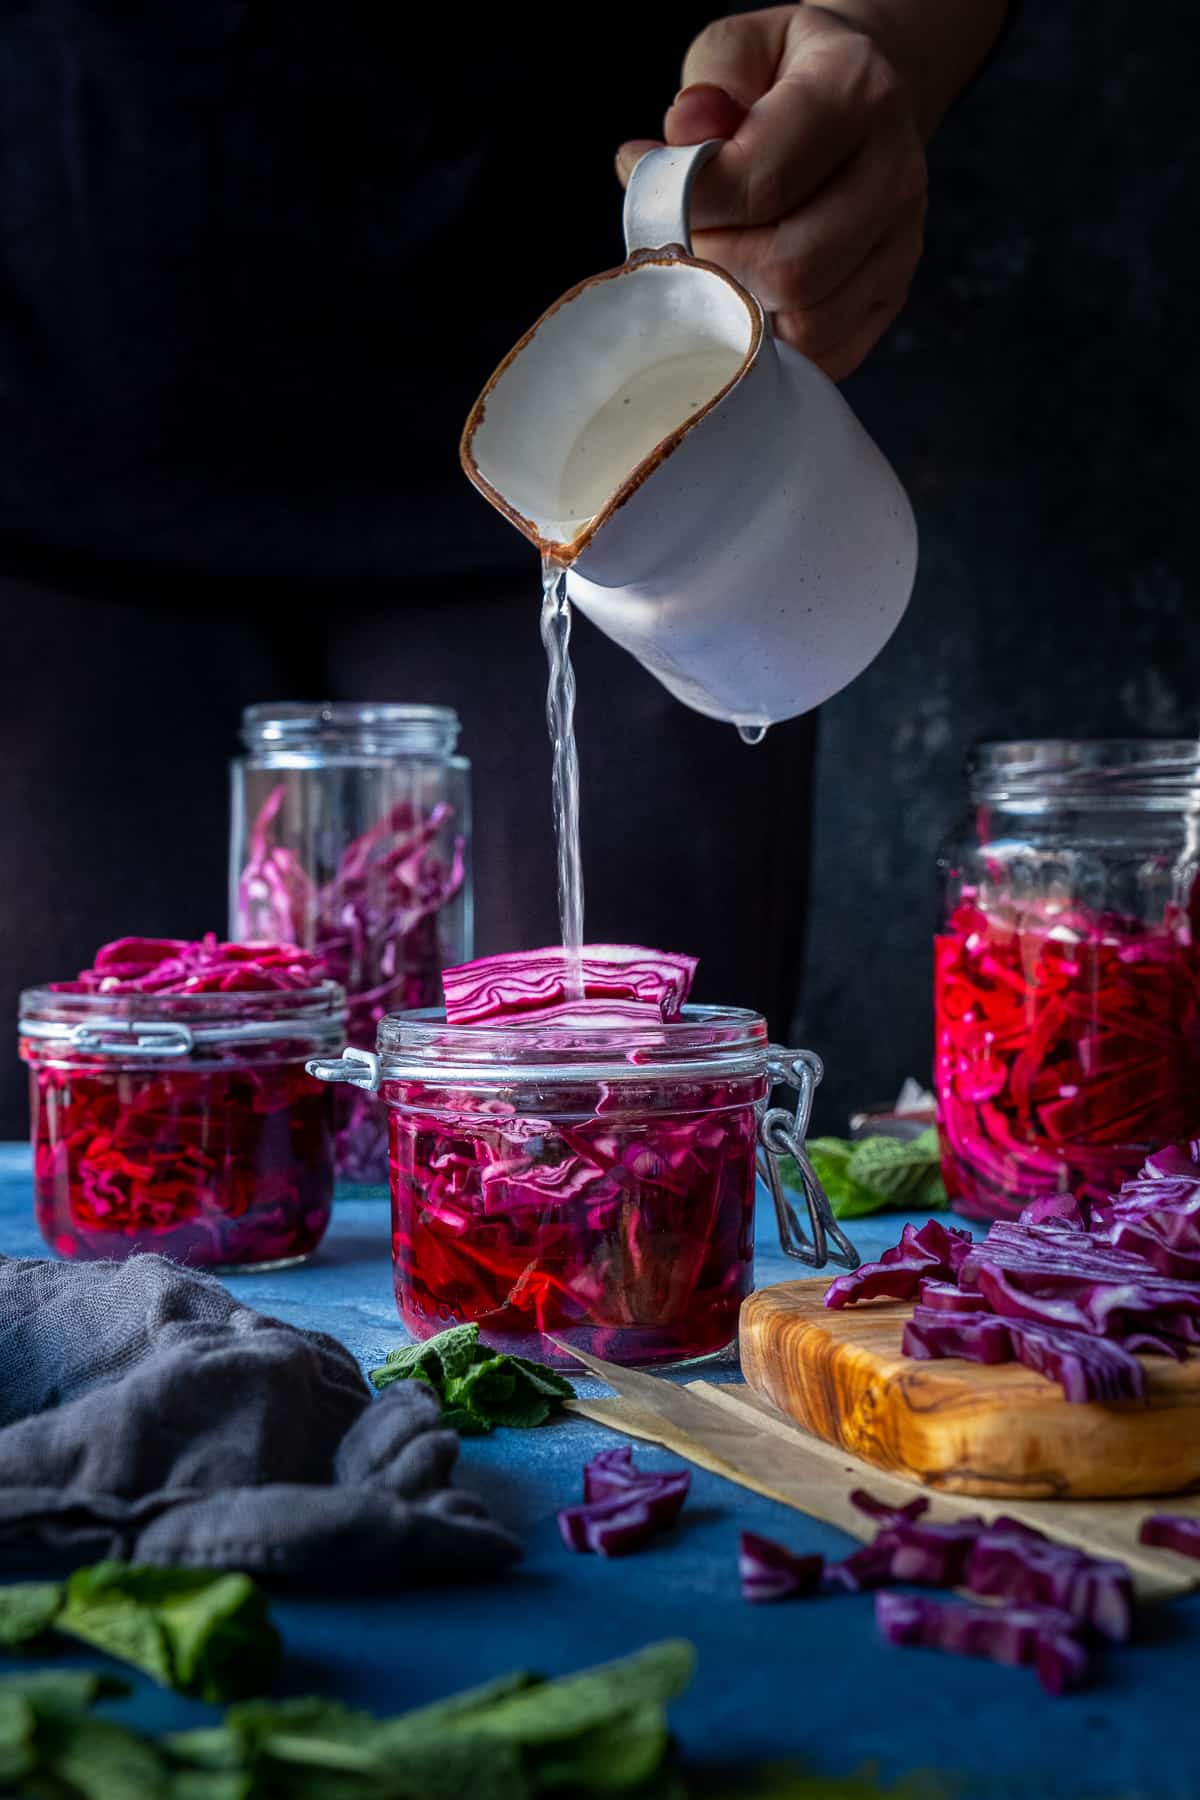 Pickle brine being poured over shredded red cabbage in a jar on a dark background.